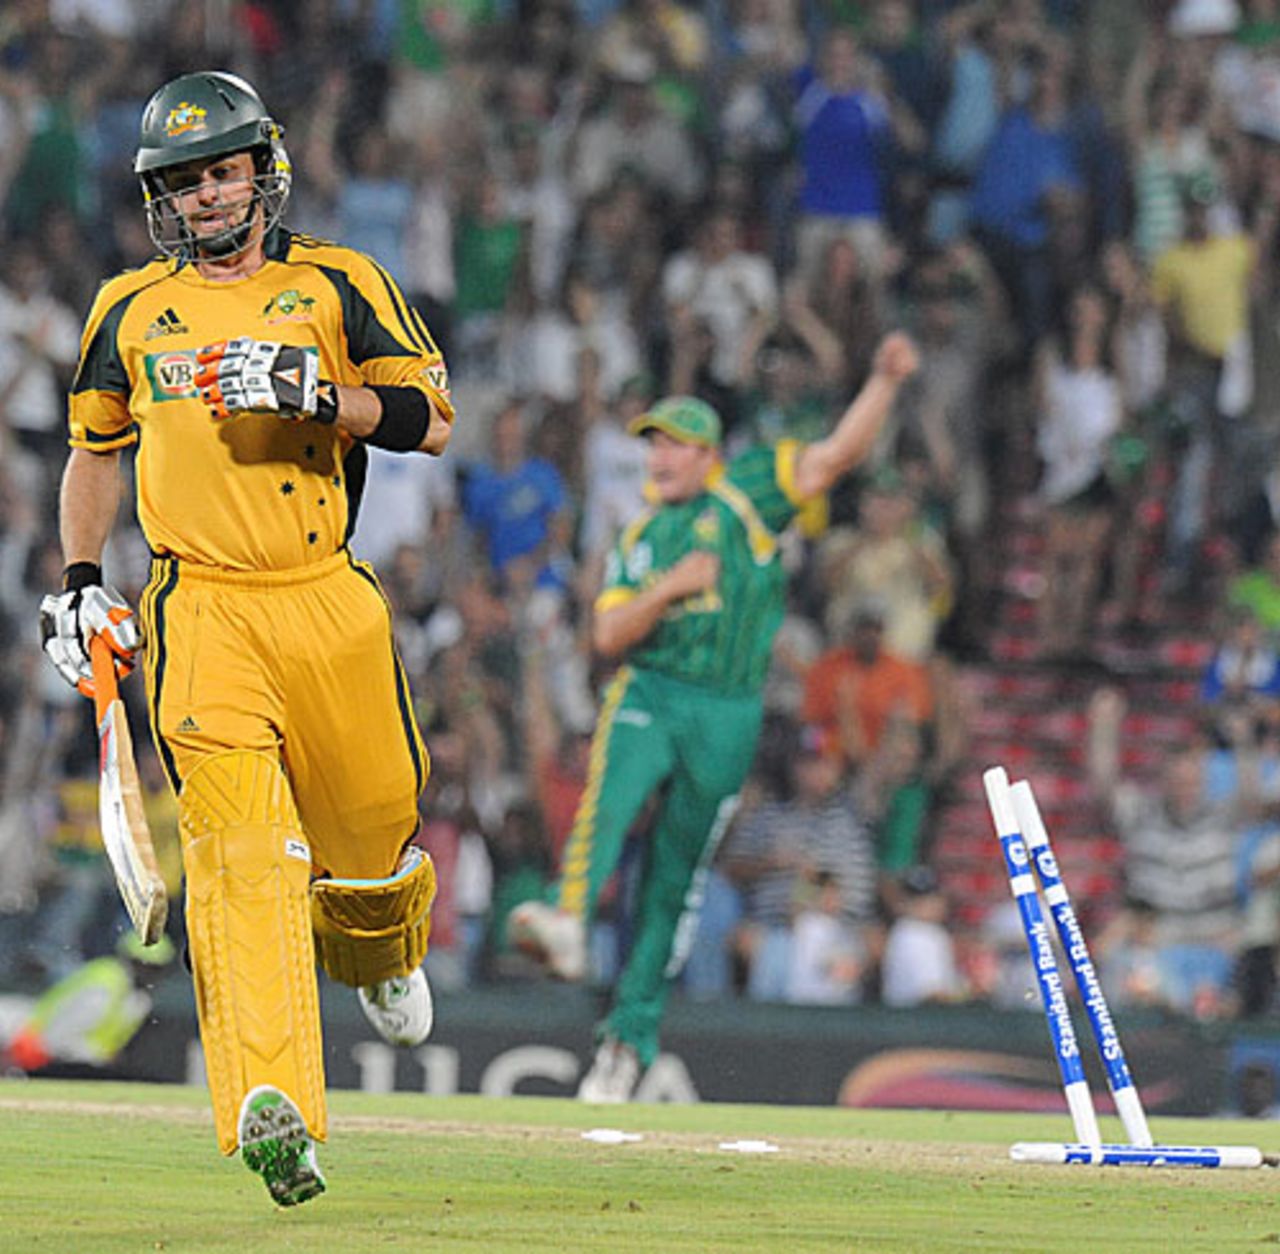 Callum Ferguson is run out for a duck after a terrible mix-up with David Hussey, South Africa v Australia, 2nd Twenty20, Centurion, March 29, 2009